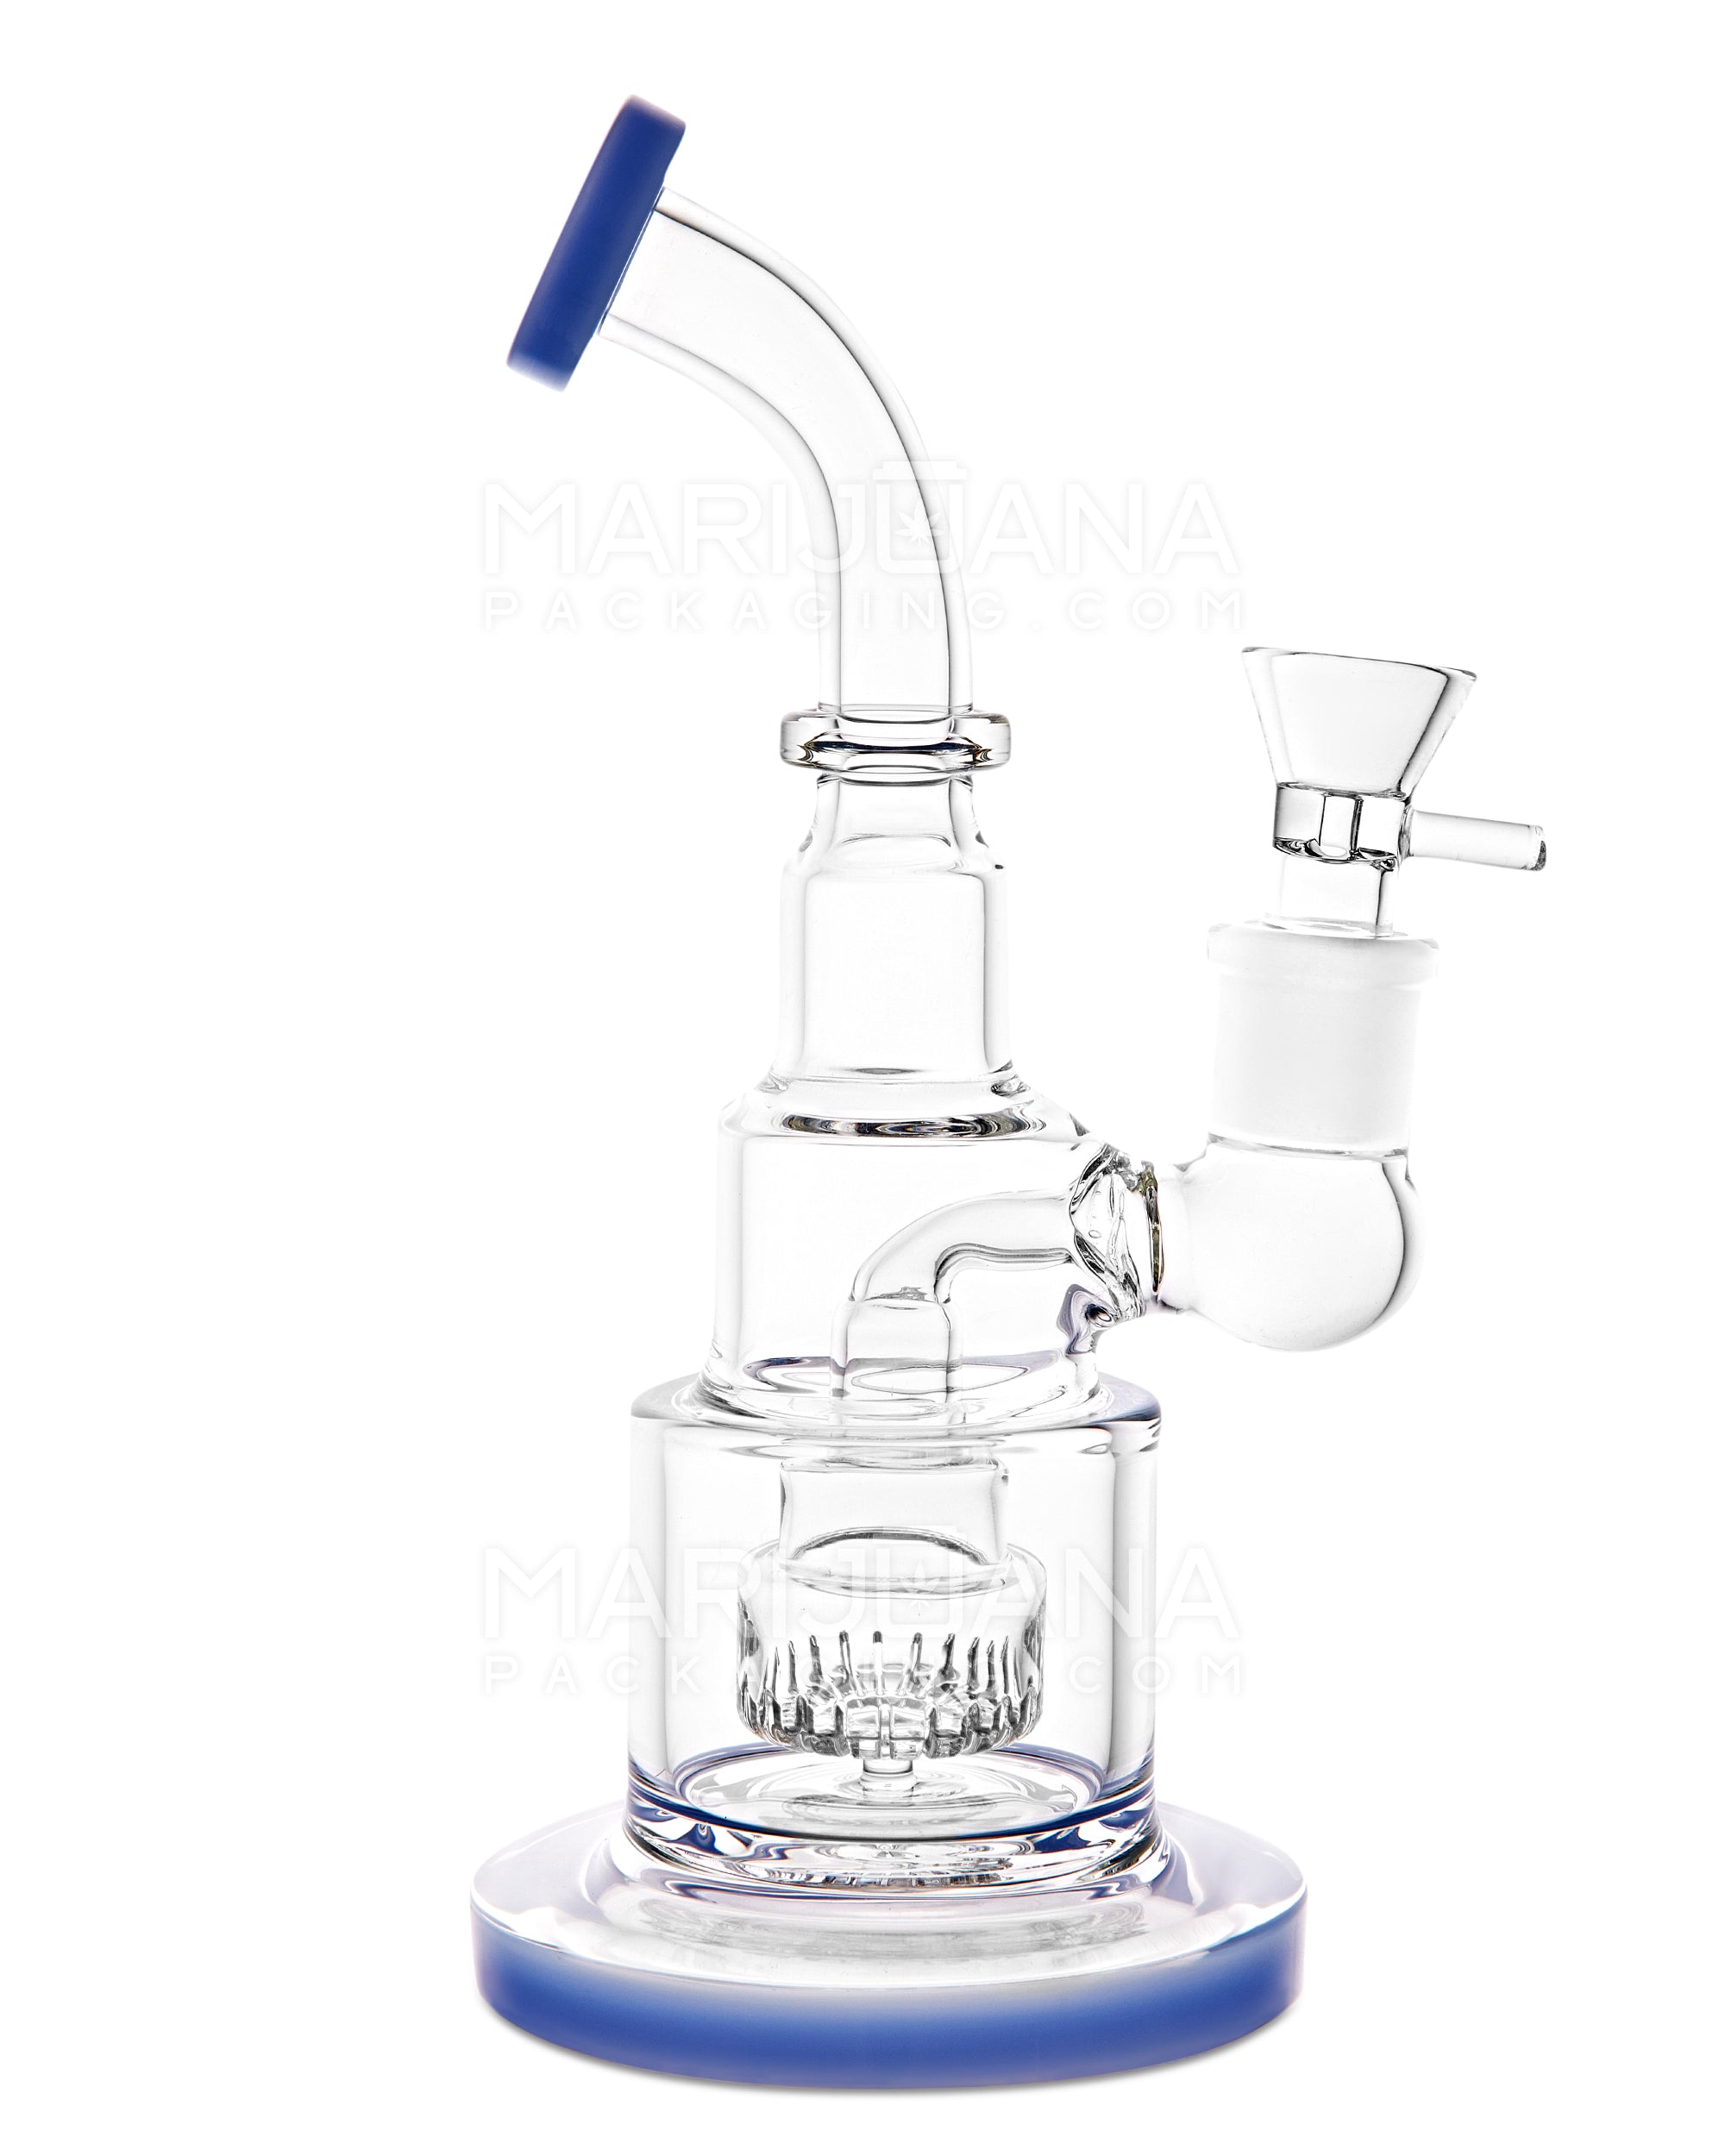 Bent Neck Showerhead Perc Glass Water Pipe w/ Thick Base | 9in Tall - 18mm Bowl - Blue - 1